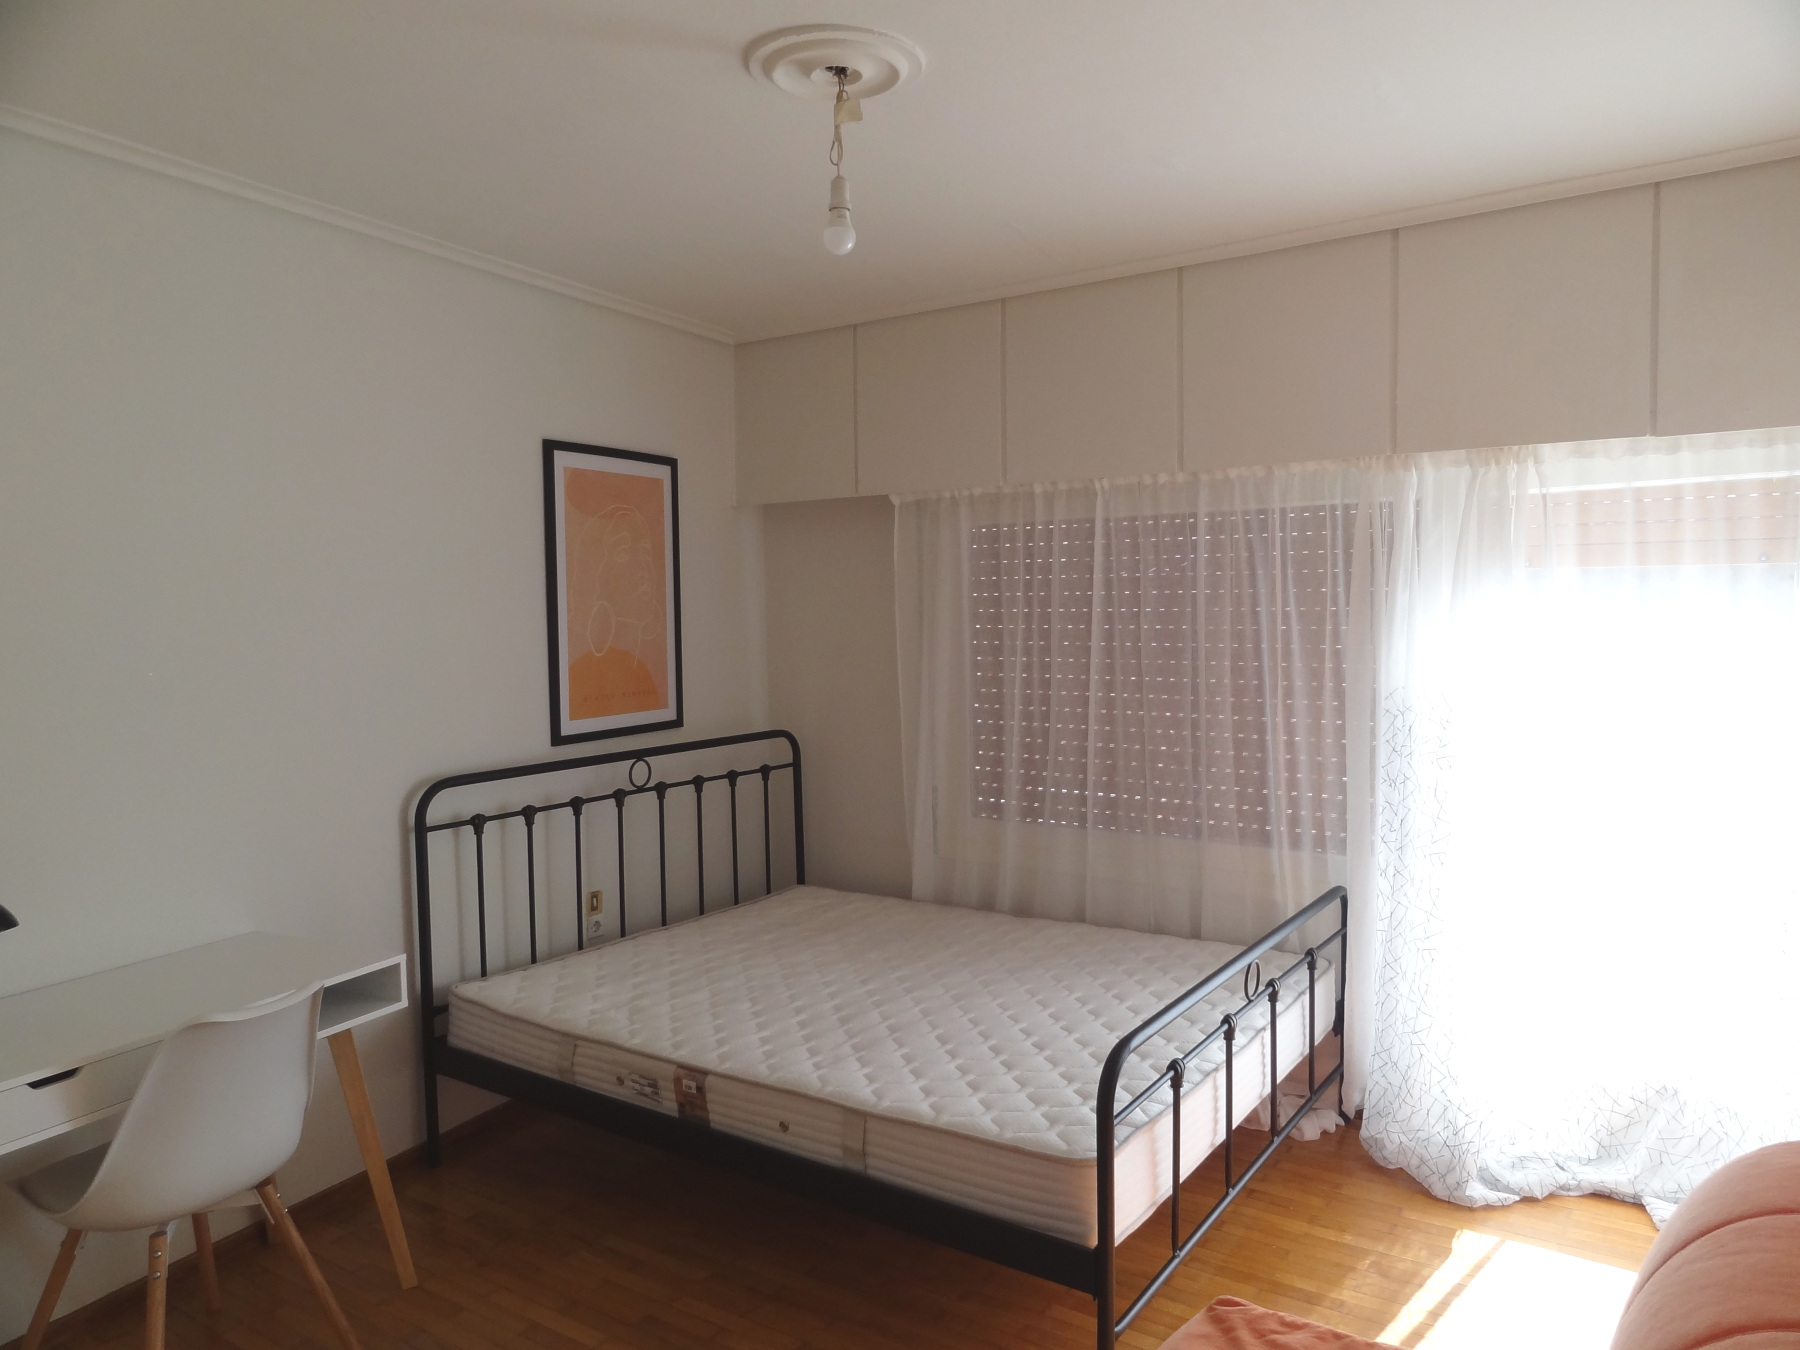 Furnished studio for rent 33 sq.m. 5th floor in the area of Kaloutsiani in Ioannina